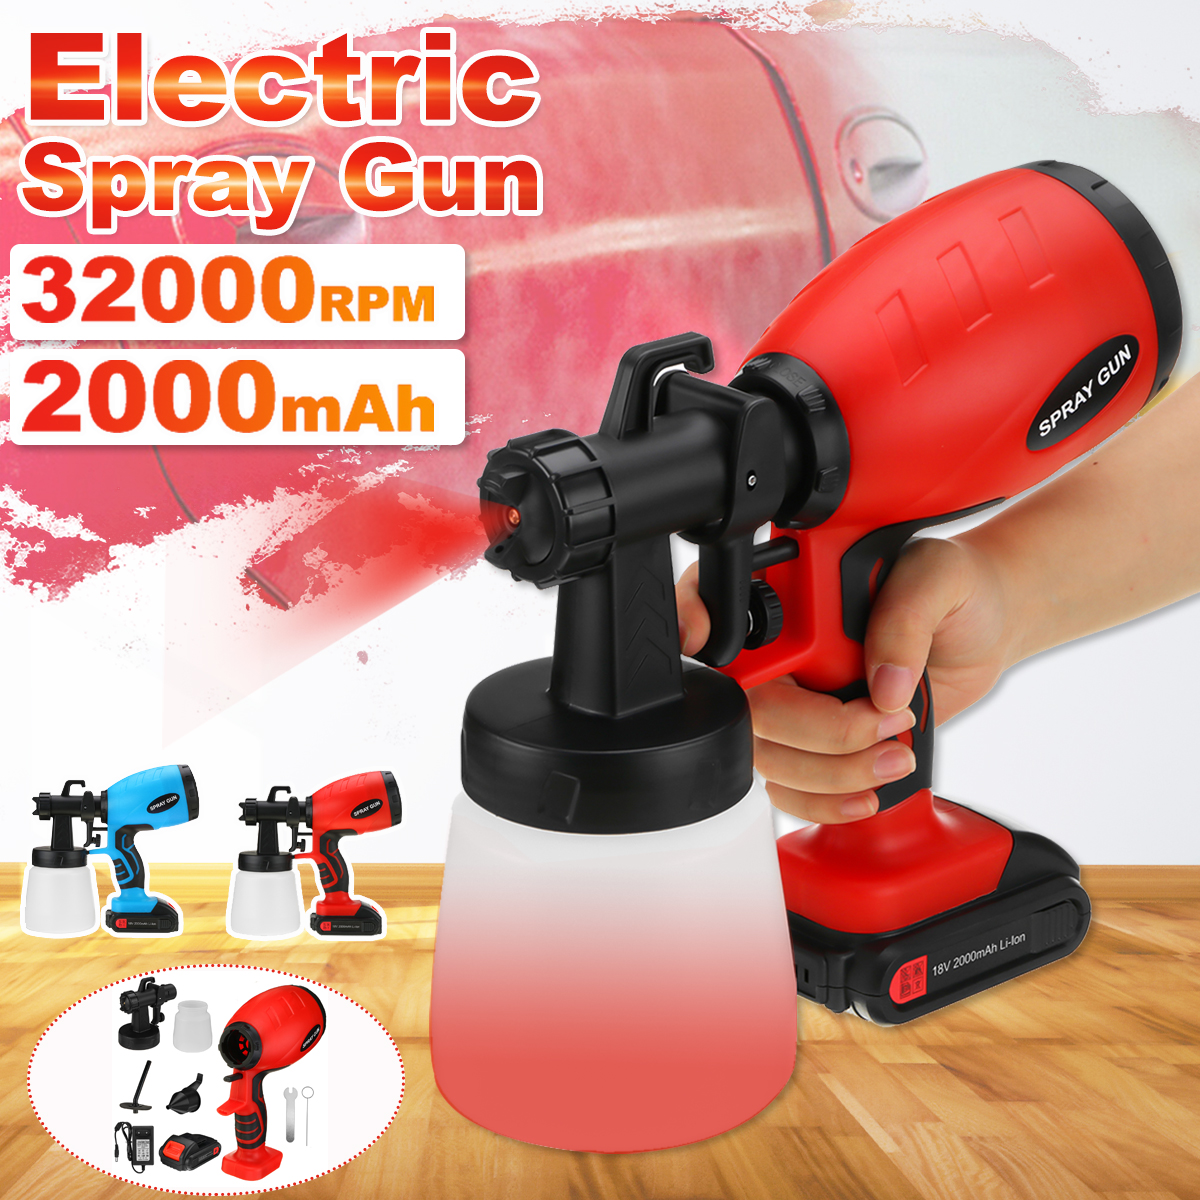 2000mAh-Portable-Electric-Paint-Sprayer-Wireless-Handheld-Spray-Guns-Home-Indoor-Fence-Painting-Tool-1851241-2